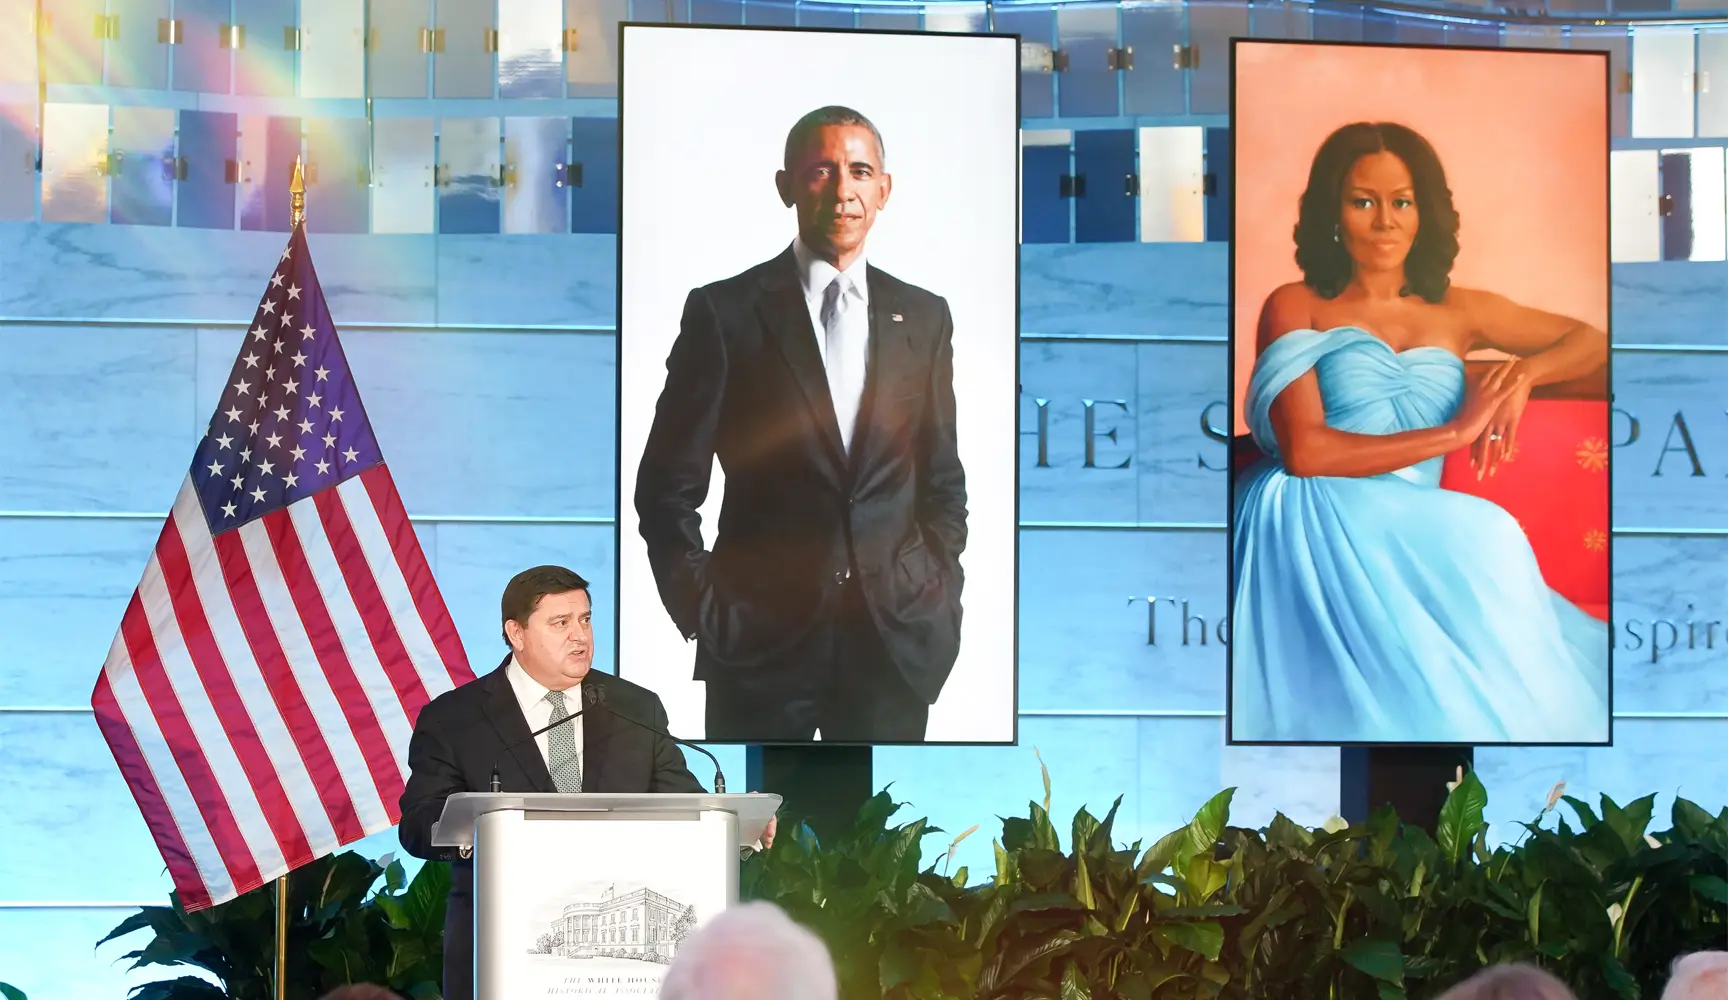 Unveiling of the Obama portraits.